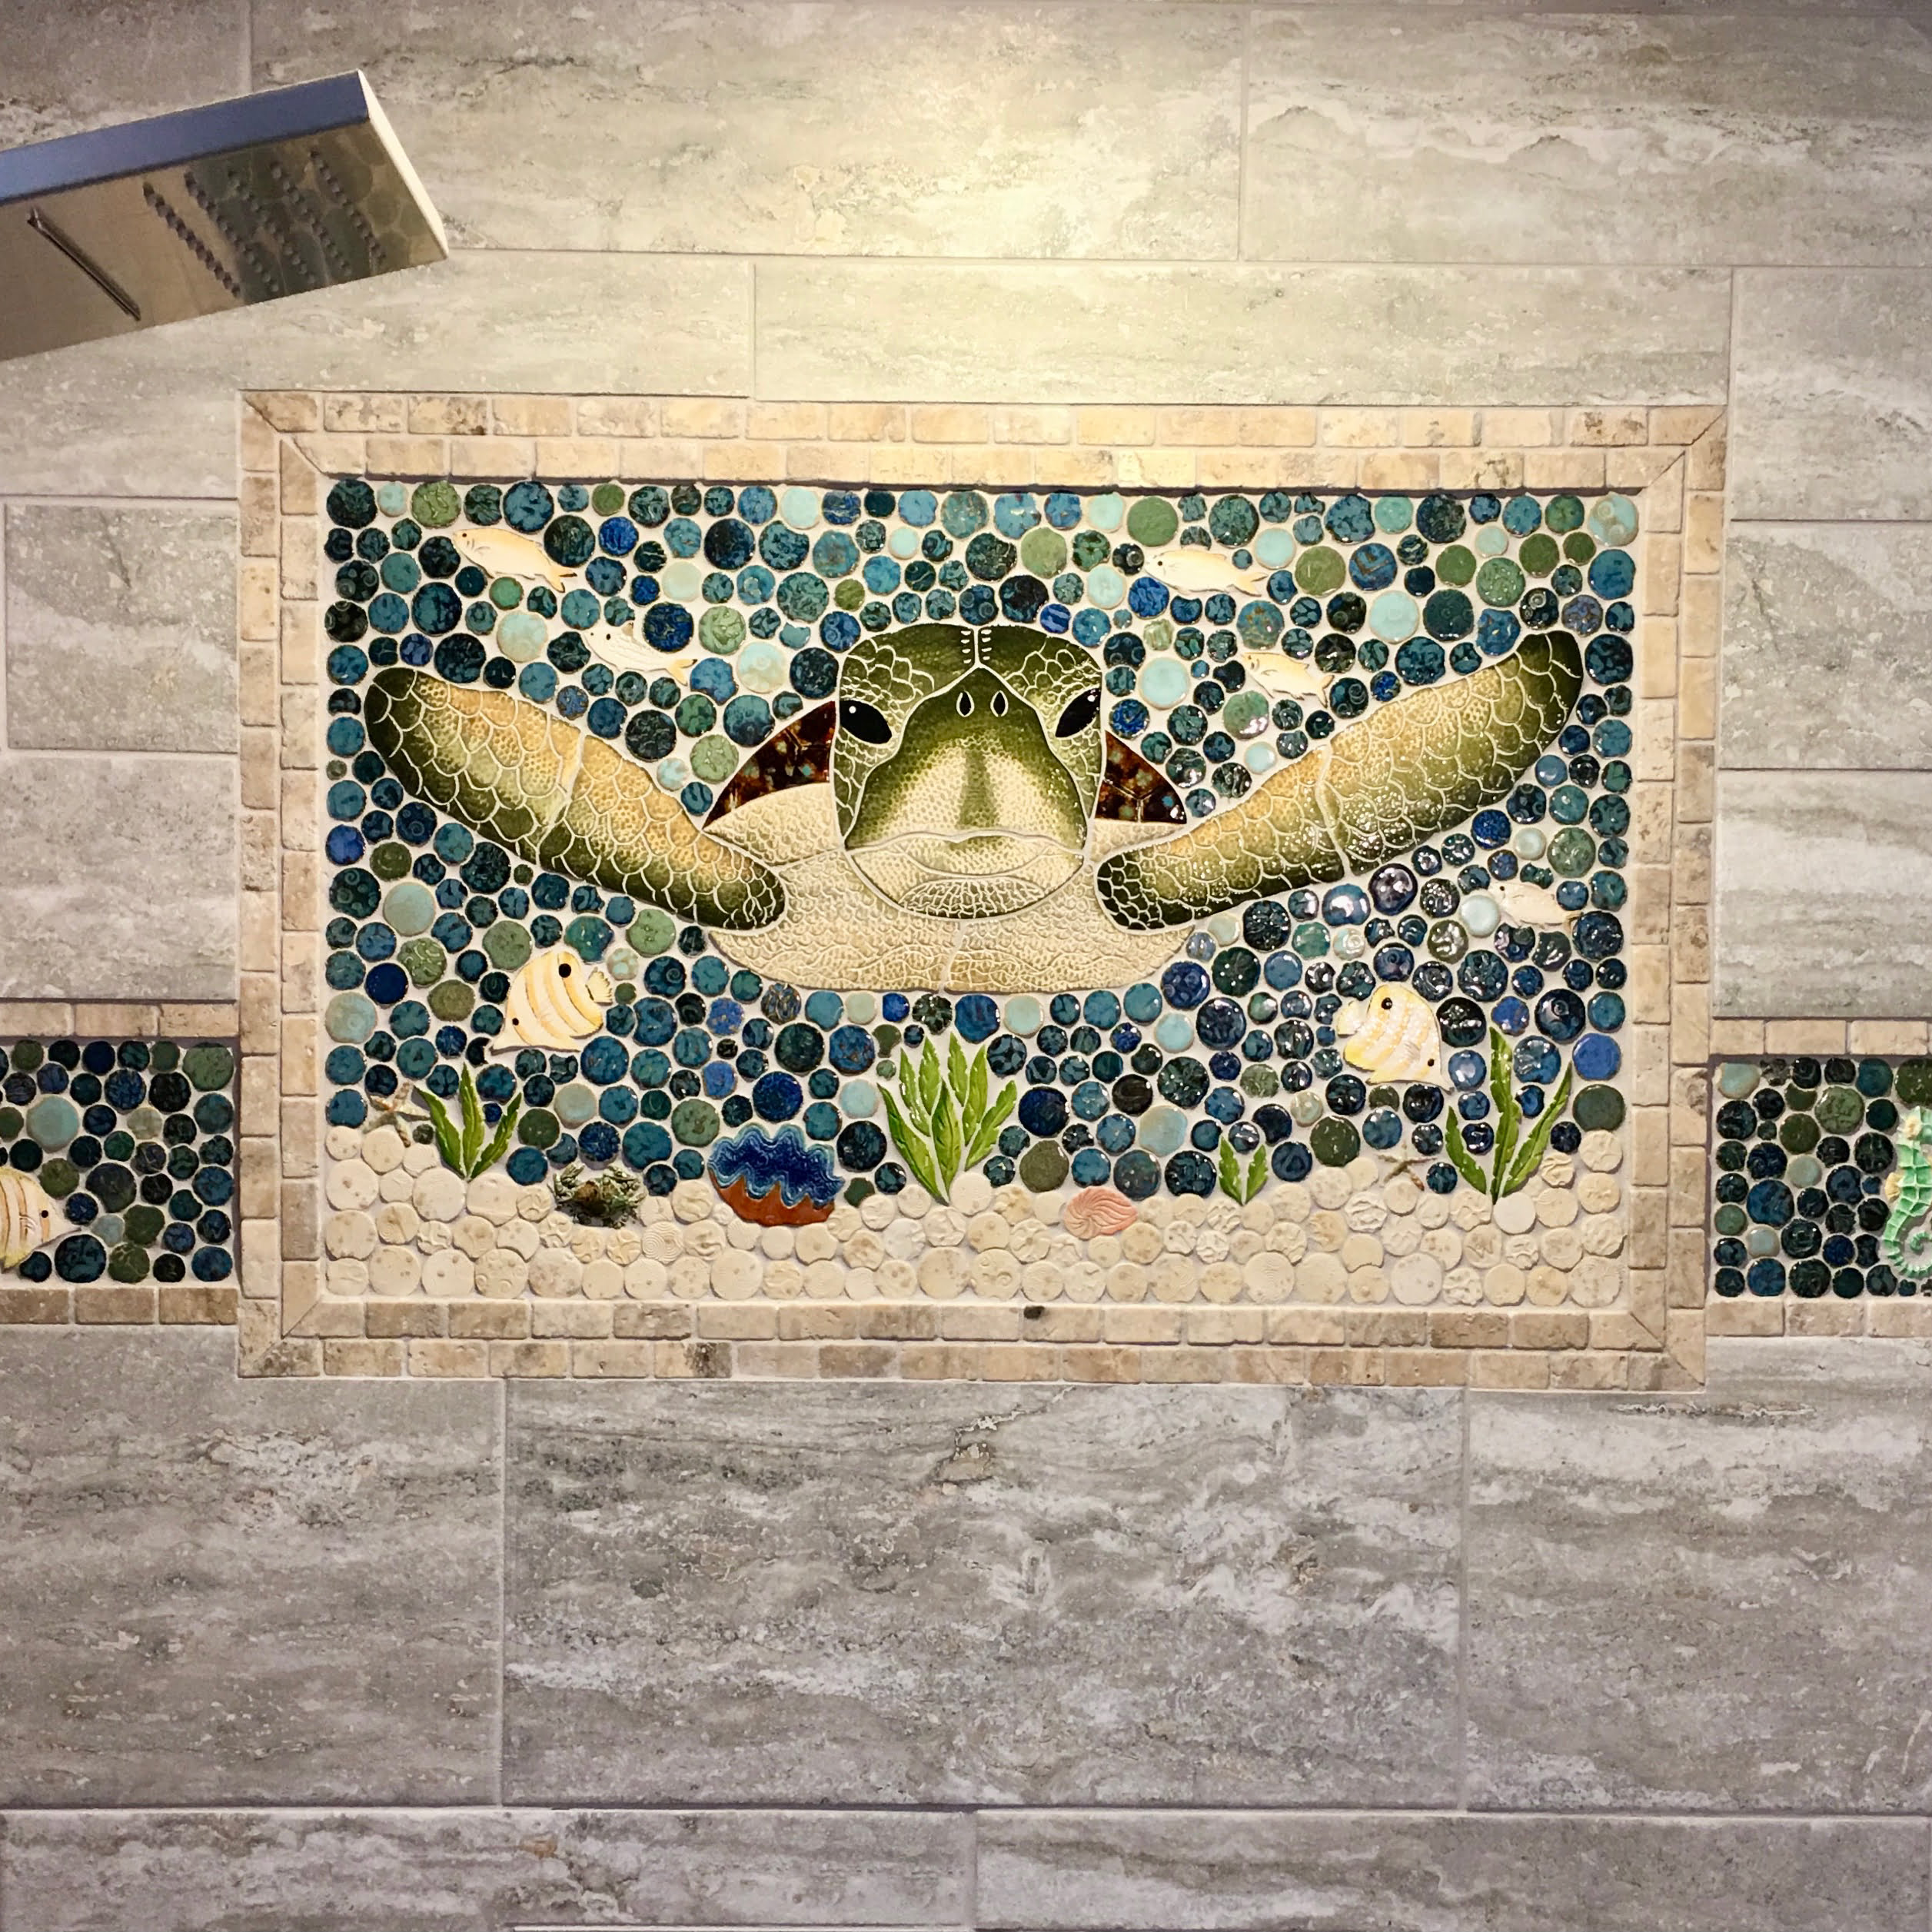 Sea Turtle Mosaic Project made by Custom Mosaics via Connie Williams for use by 360 Magazine